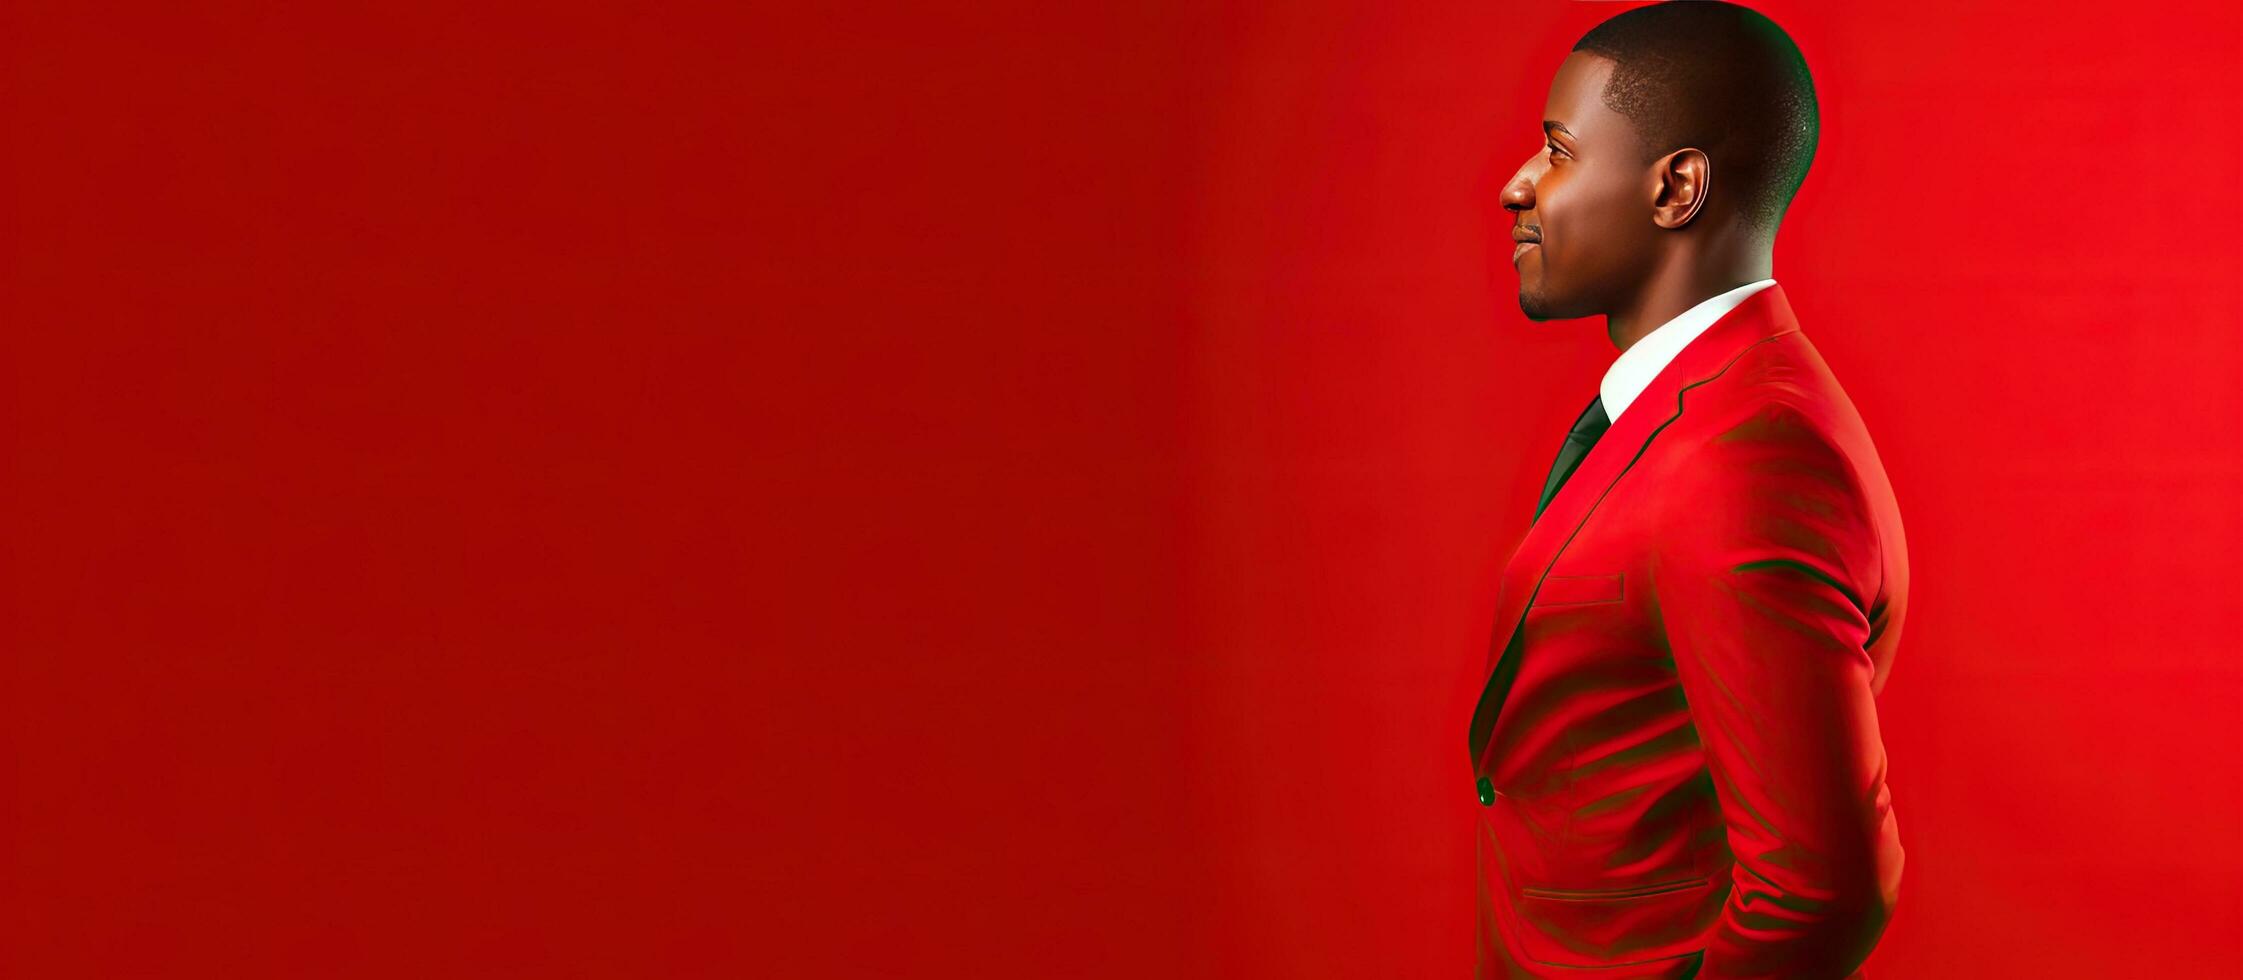 Portrait of a young confident African American businessman in a stylish suit standing with crossed hands and a smile against a vibrant red background photo